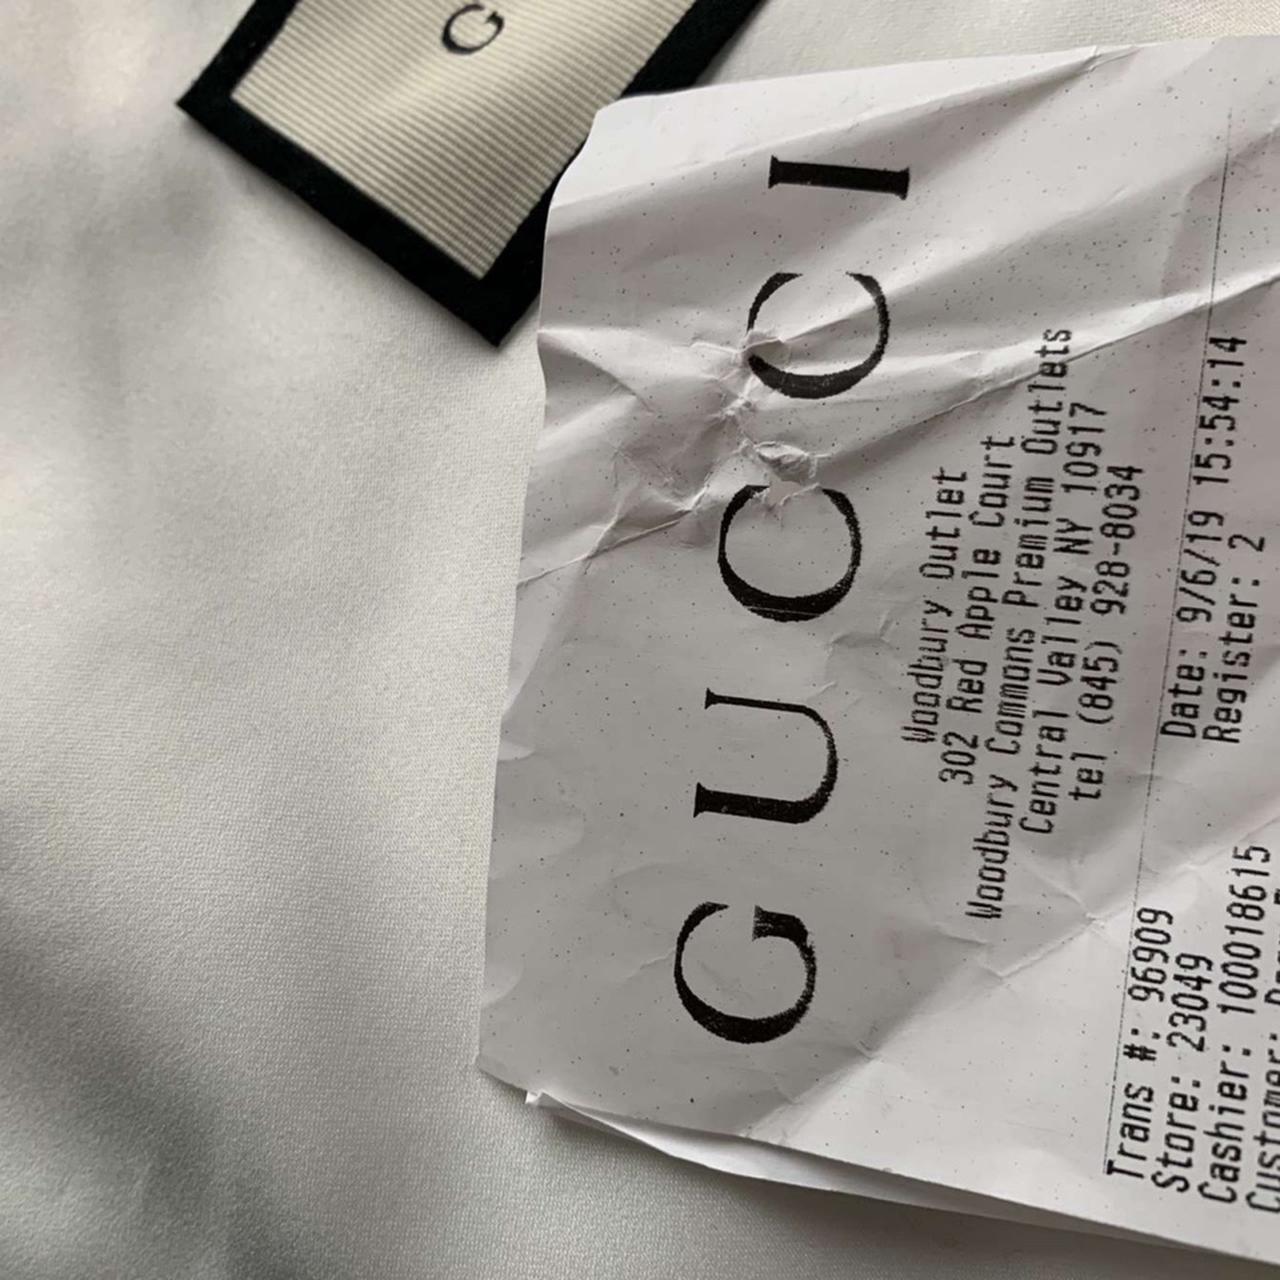 Gucci Outlet - Central Valley, NY